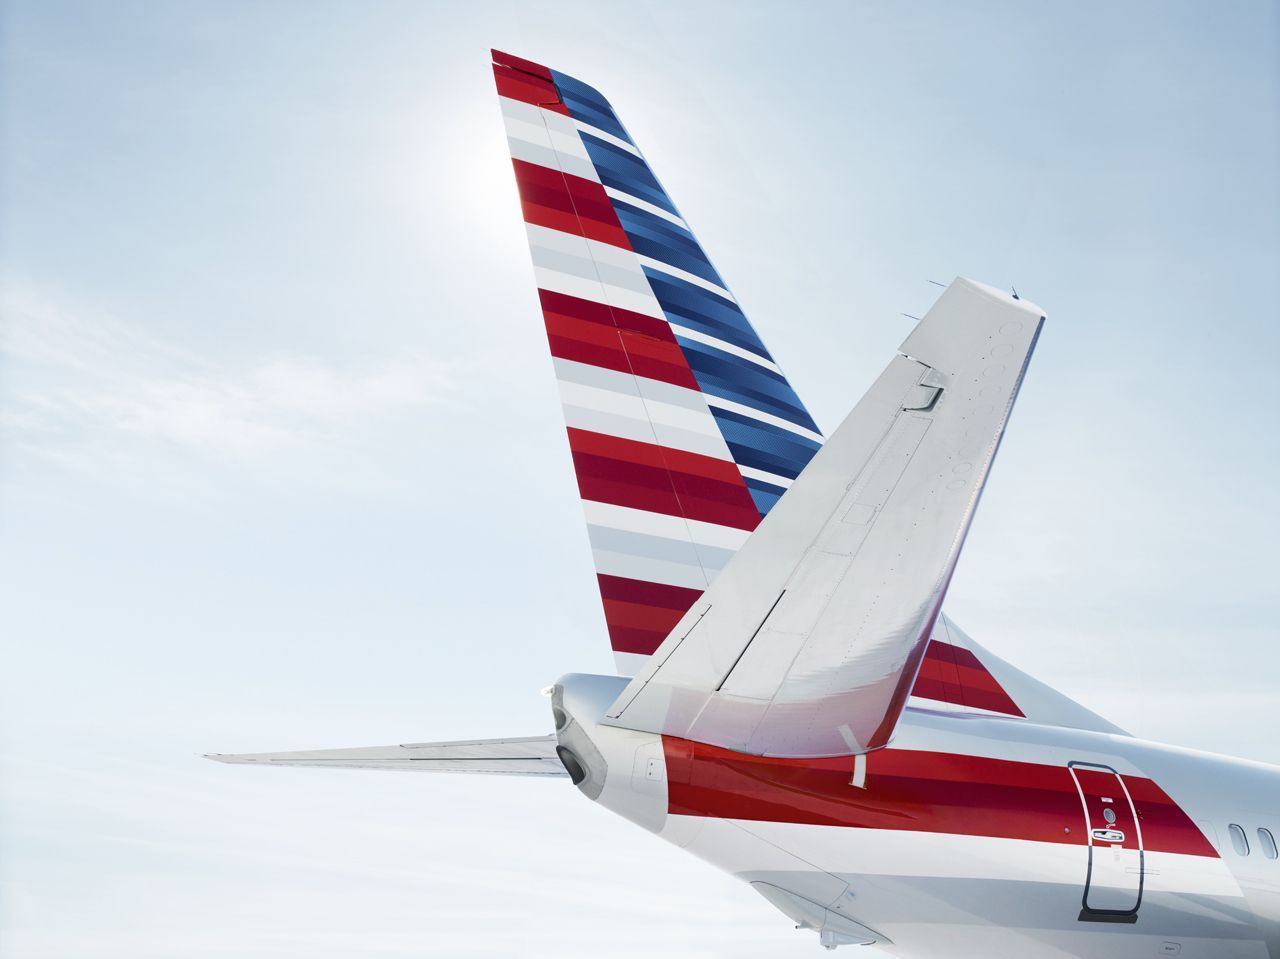 American will be the only US carrier offering the MIA TLV route